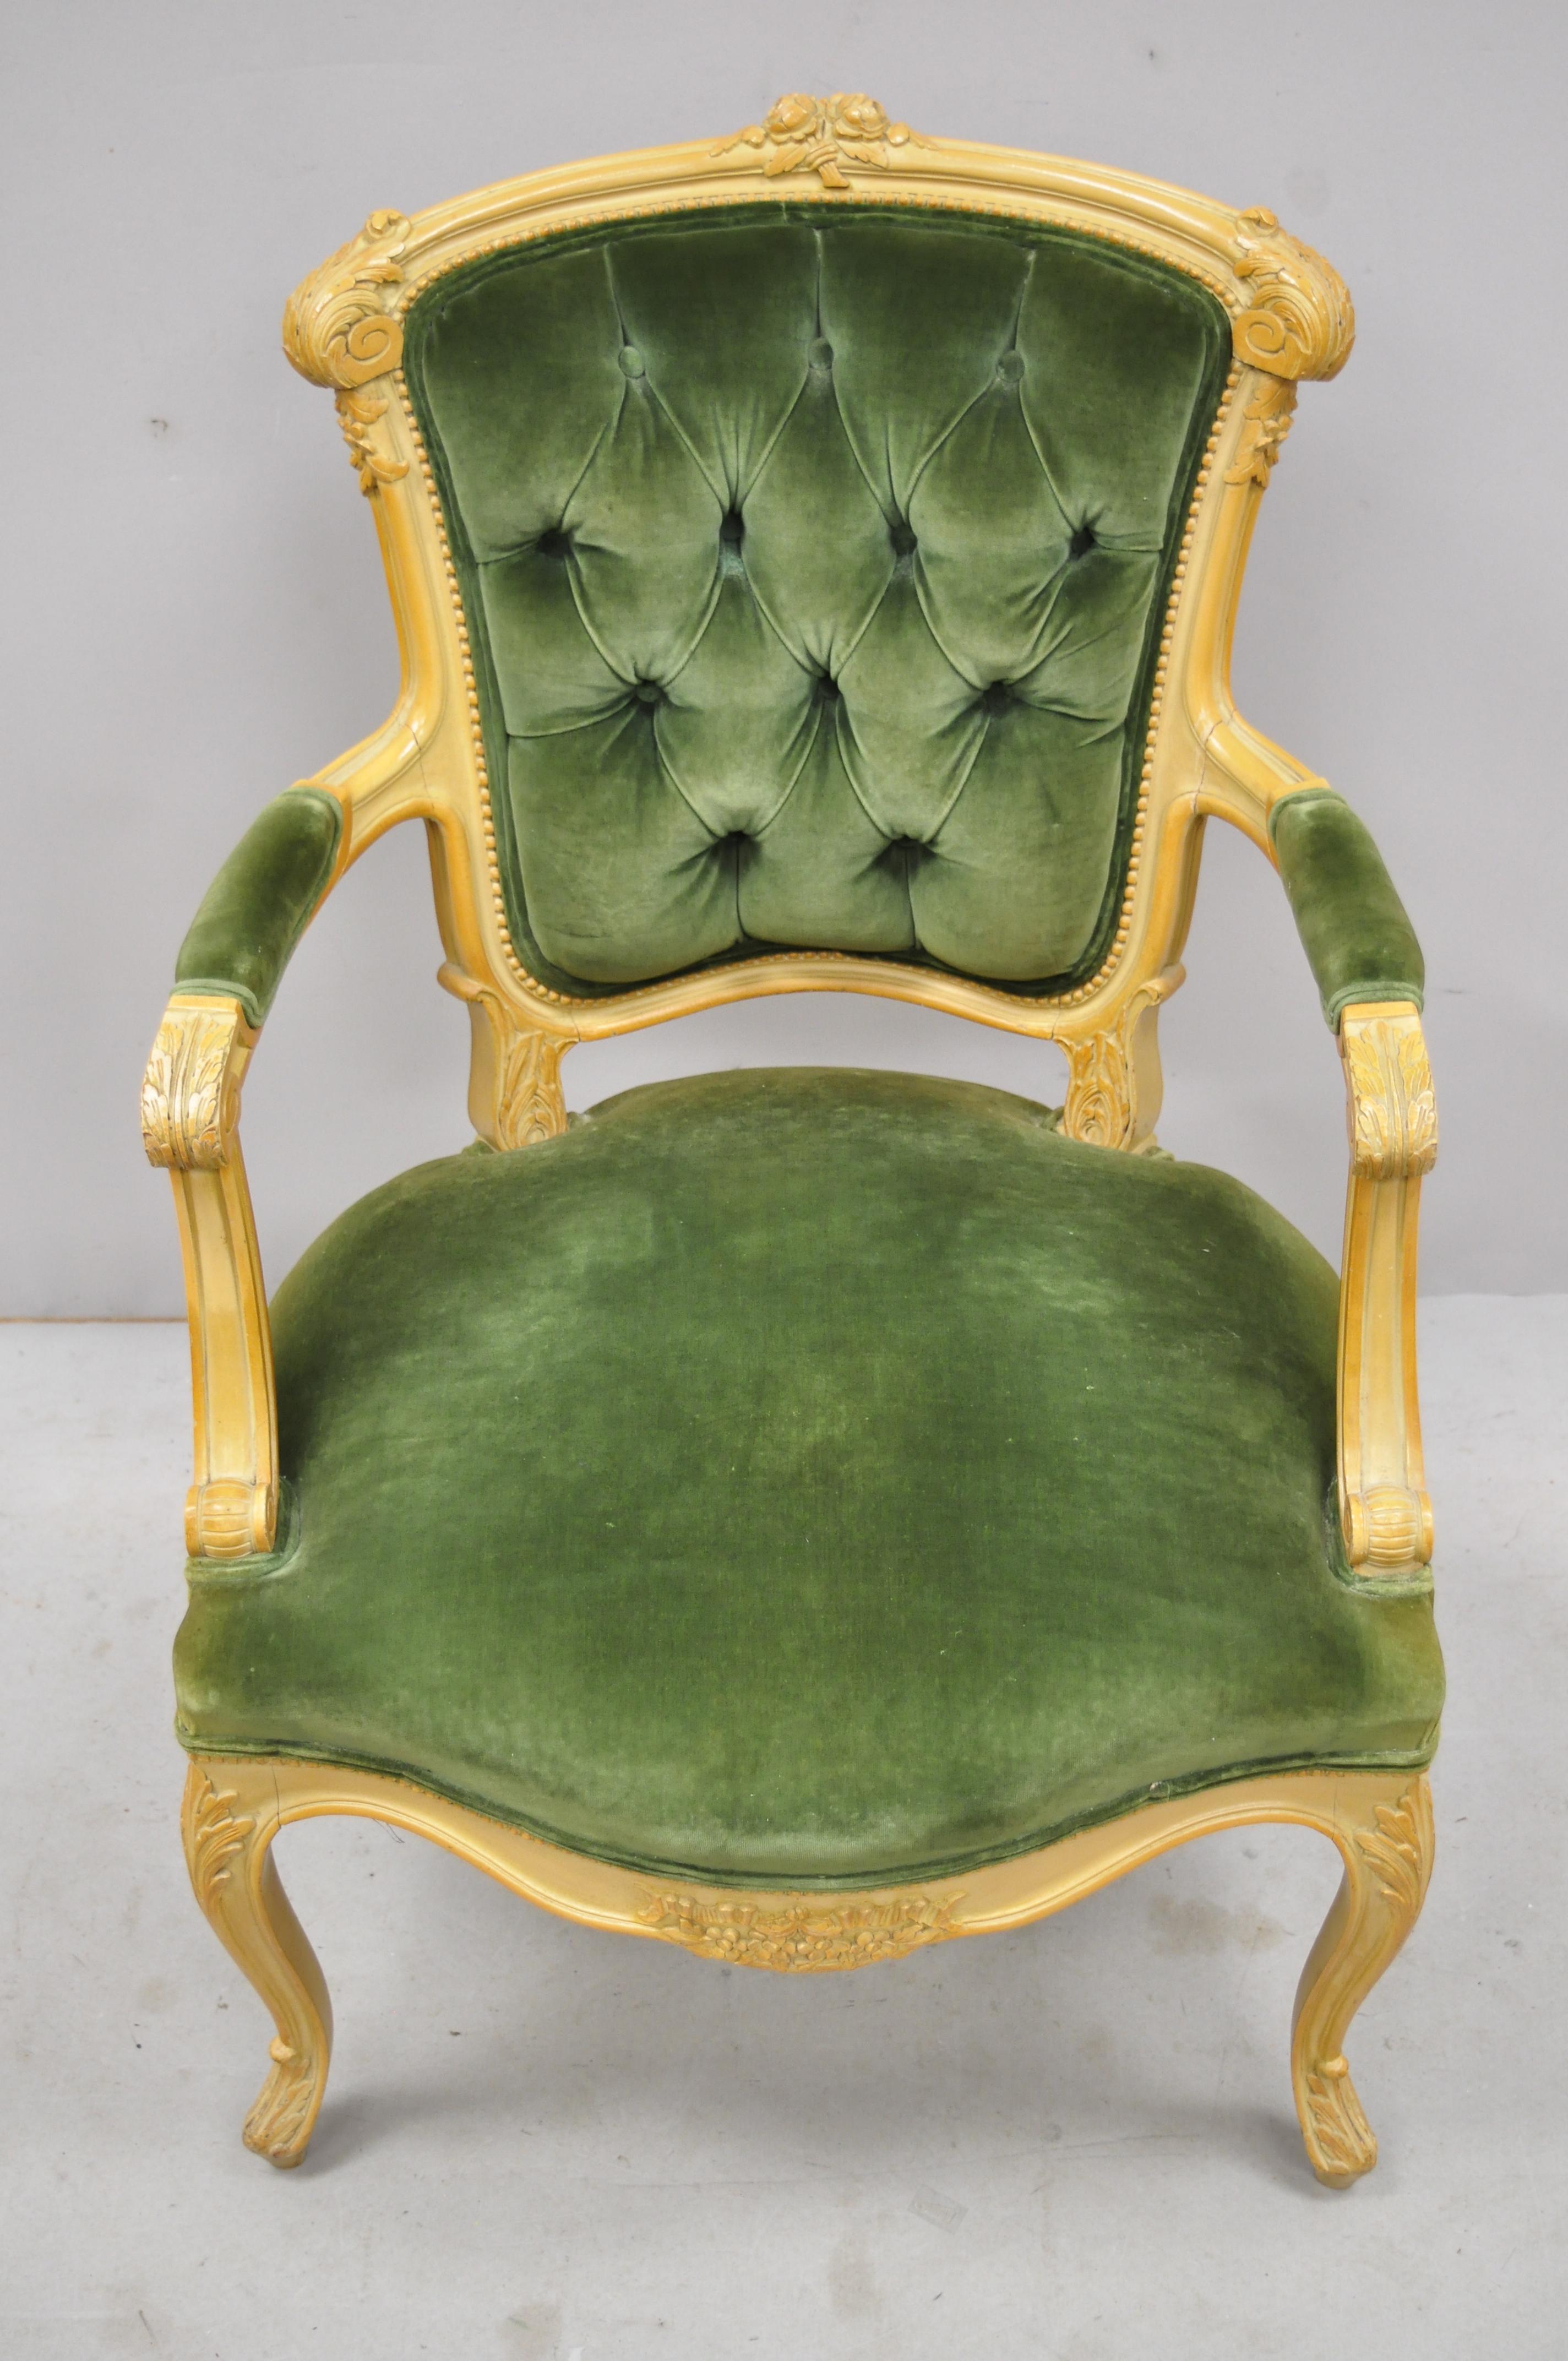 Antique French Louis XV Victorian style Fauteuil green velvet parlor armchair. Item includes green velvet tufted upholstery, finely carved frame, upholstered armrests, cabriole legs, very nice antique item, great style and form, circa early to